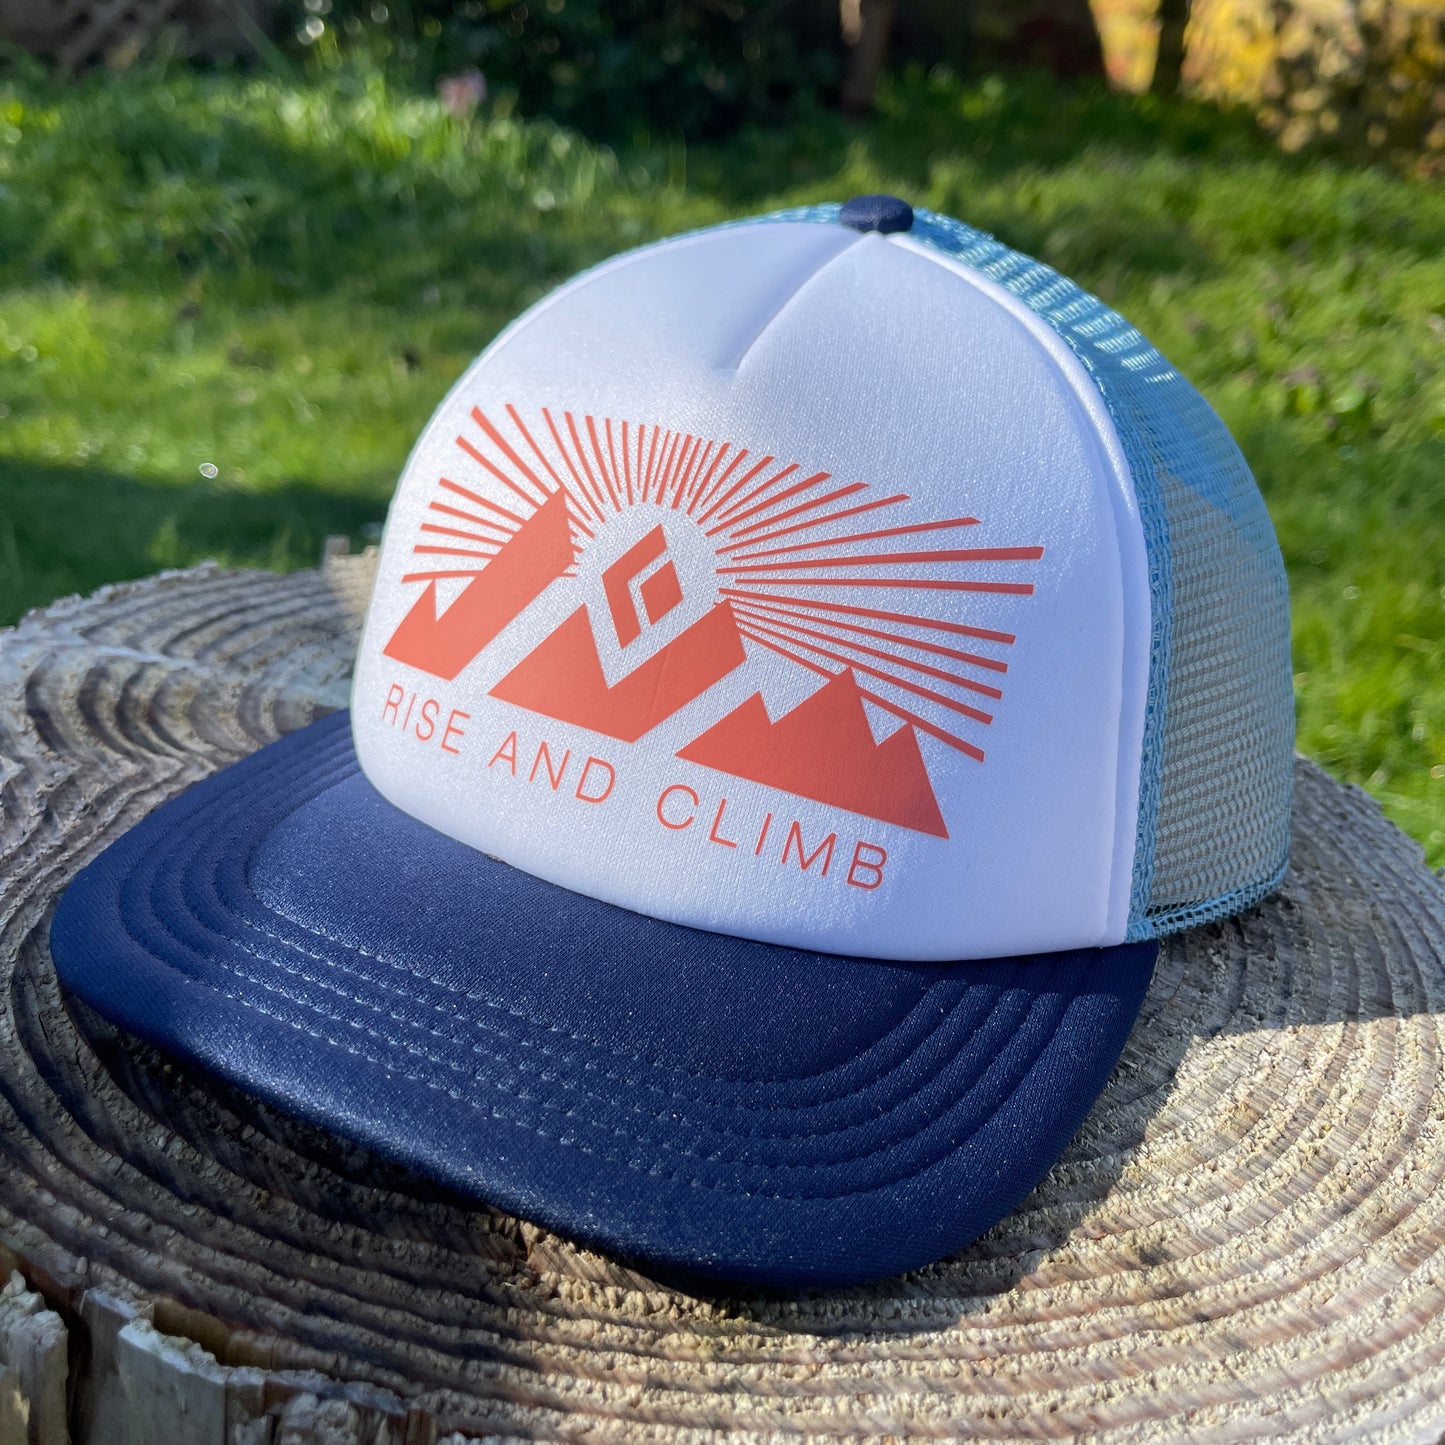 Blue brim trucker hat with white front and red Rise and Climb logo.